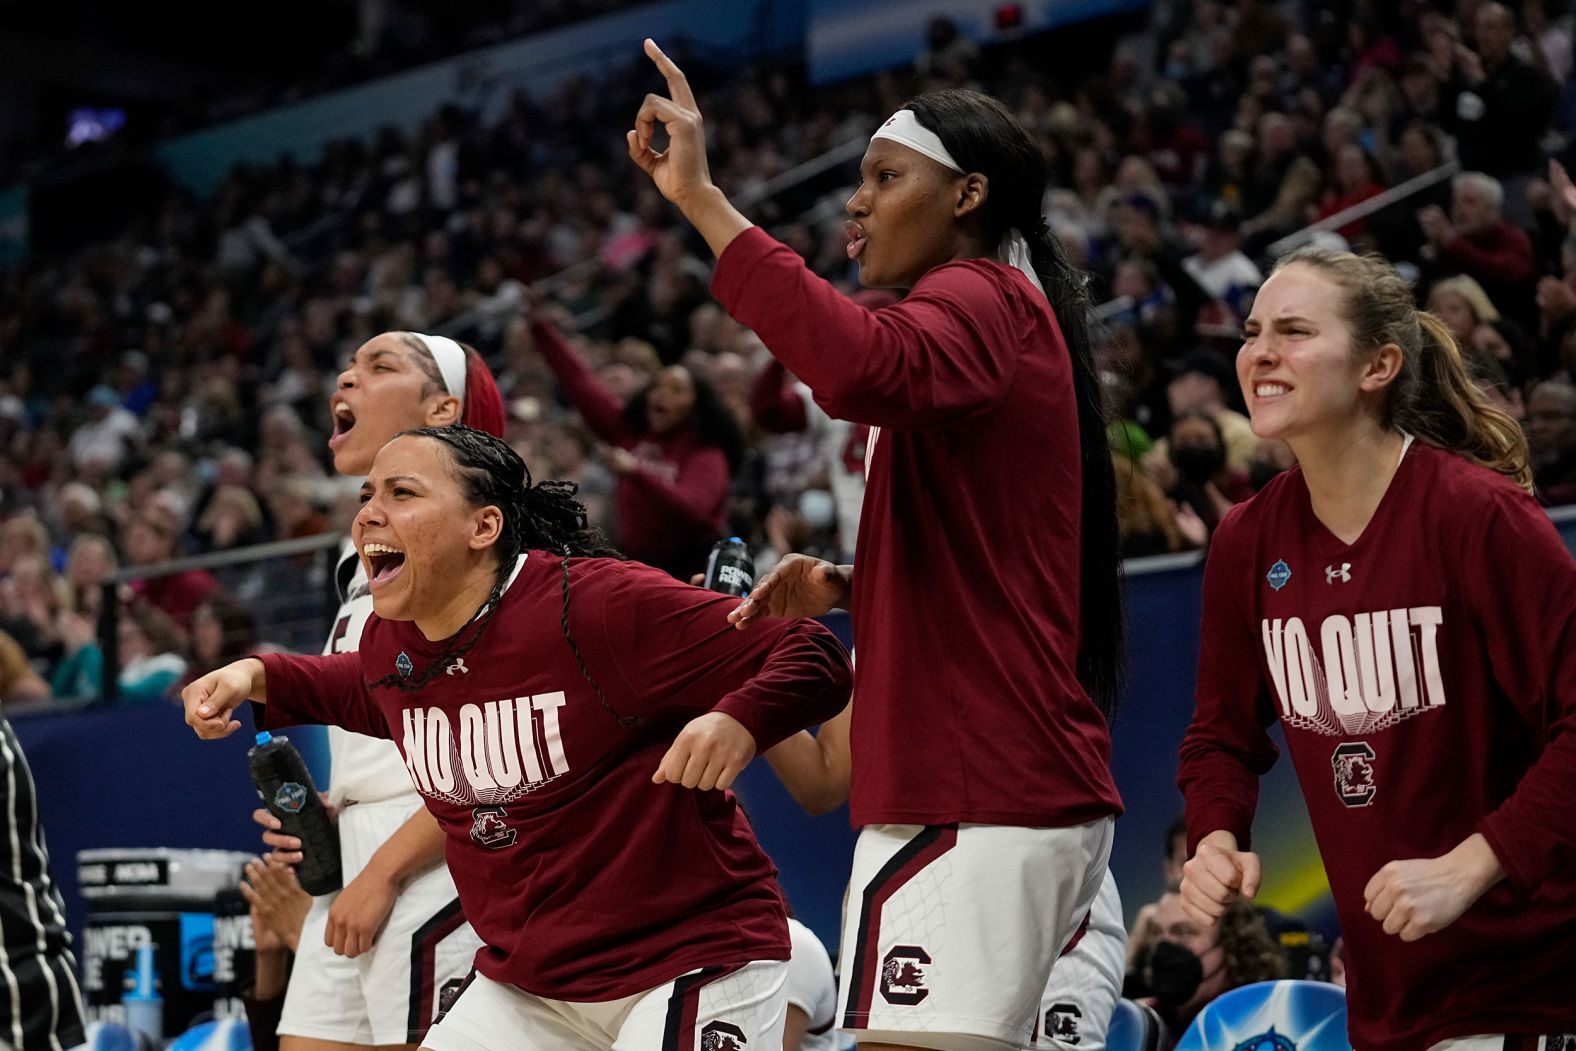 The South Carolina bench reacts to a play in the first half.